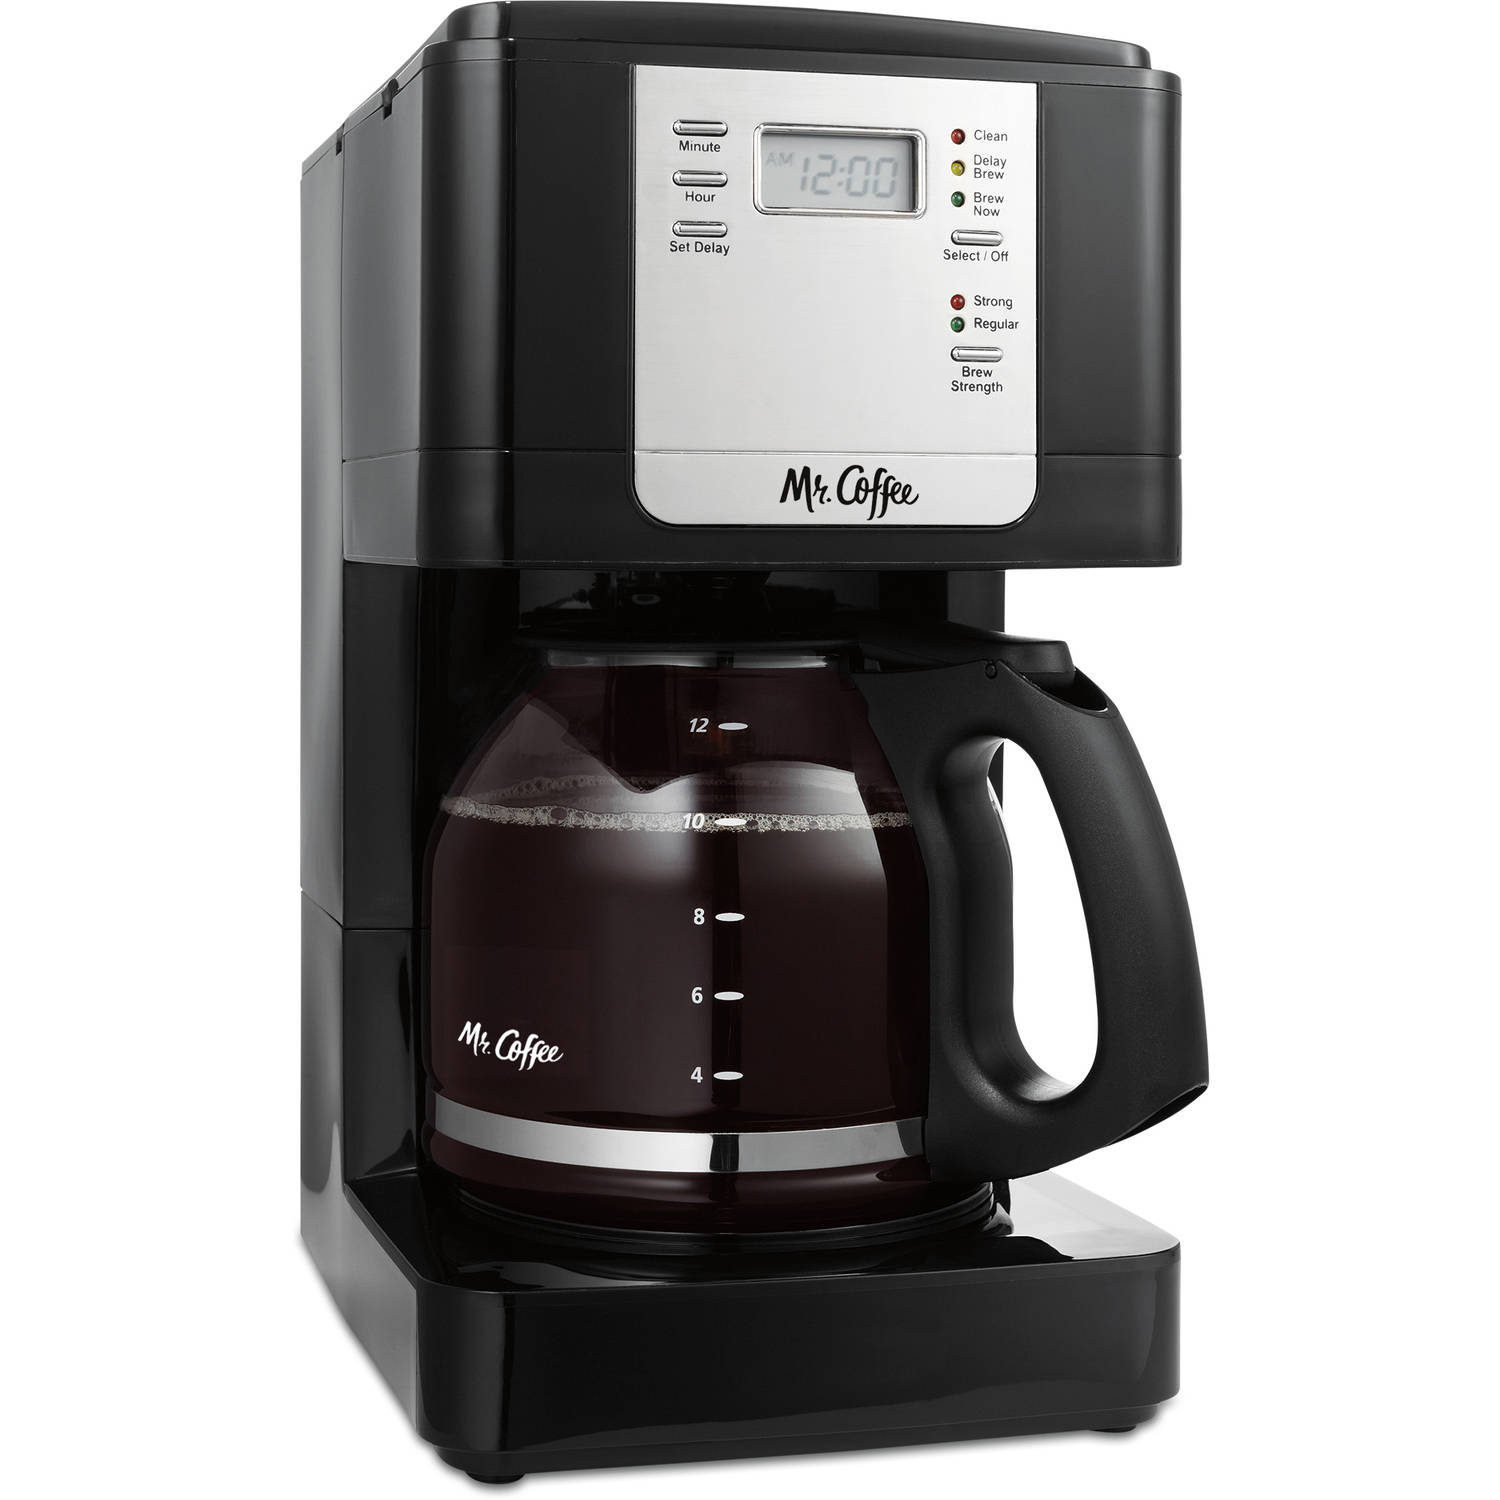 Mr. Coffee Advanced Brew 12 Cup Programmable Black Coffee Maker - image 1 of 2